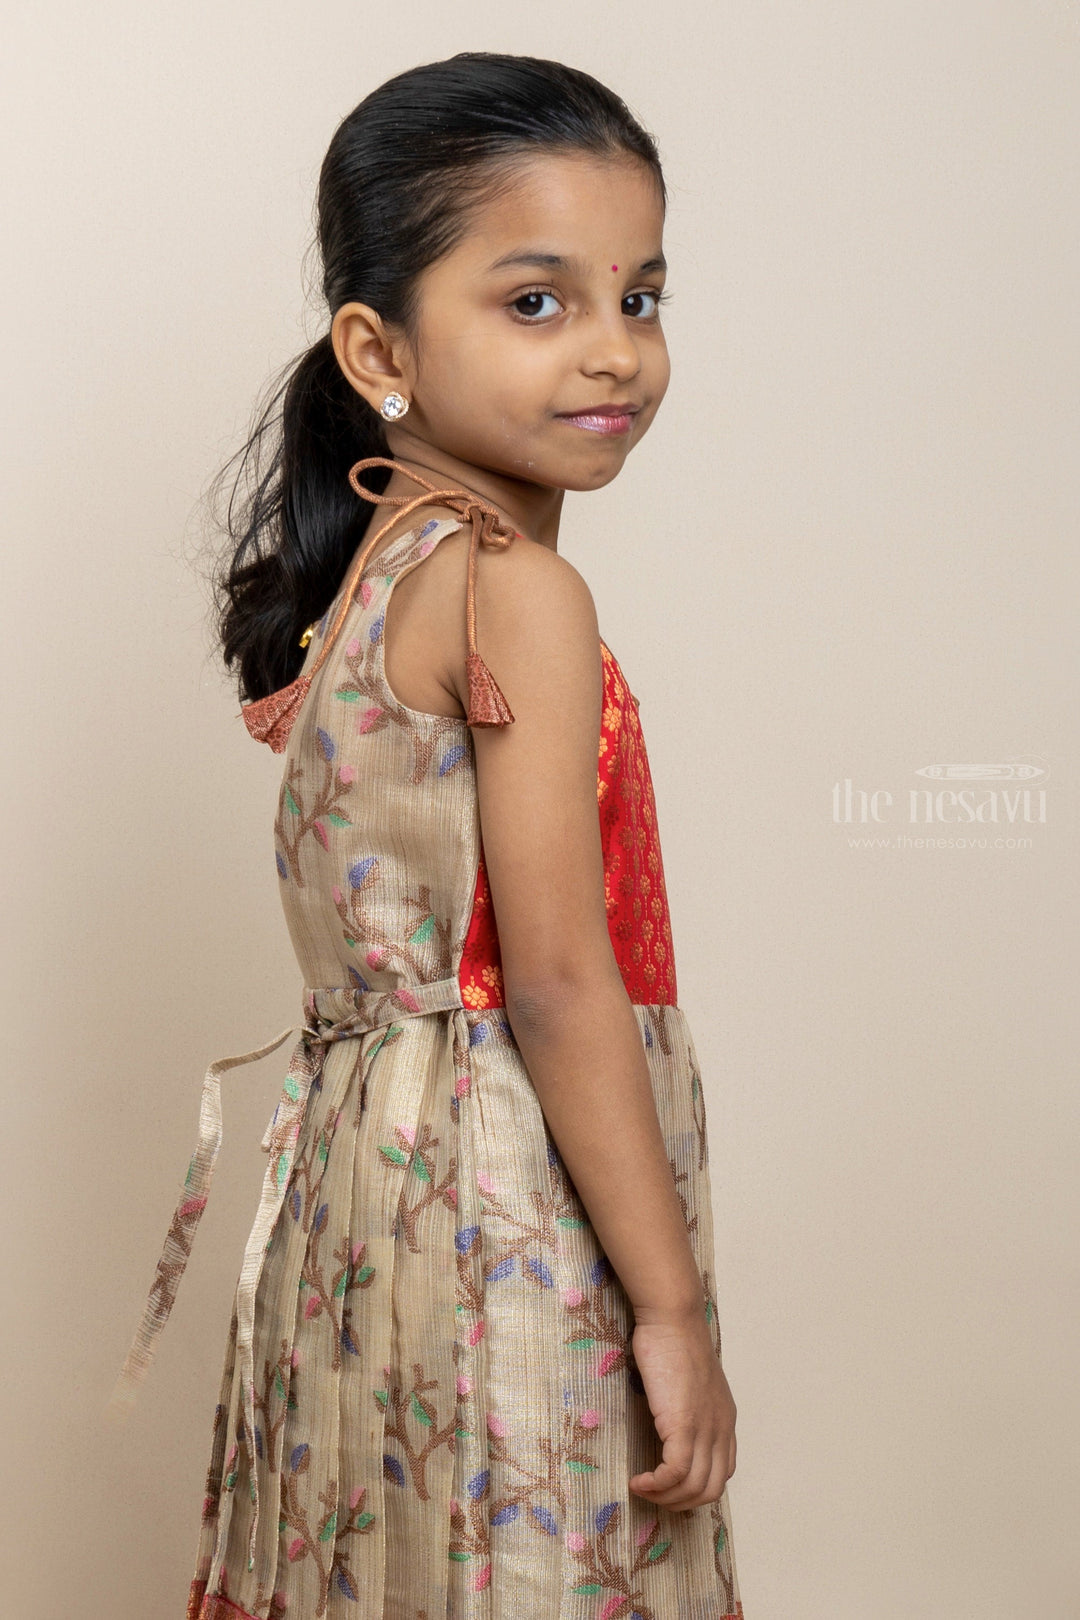 The Nesavu Tie-up Frock Racy Bright Red With Floral Printed Brocade Designer Tie-Up Frocks For Girls psr silks Nesavu